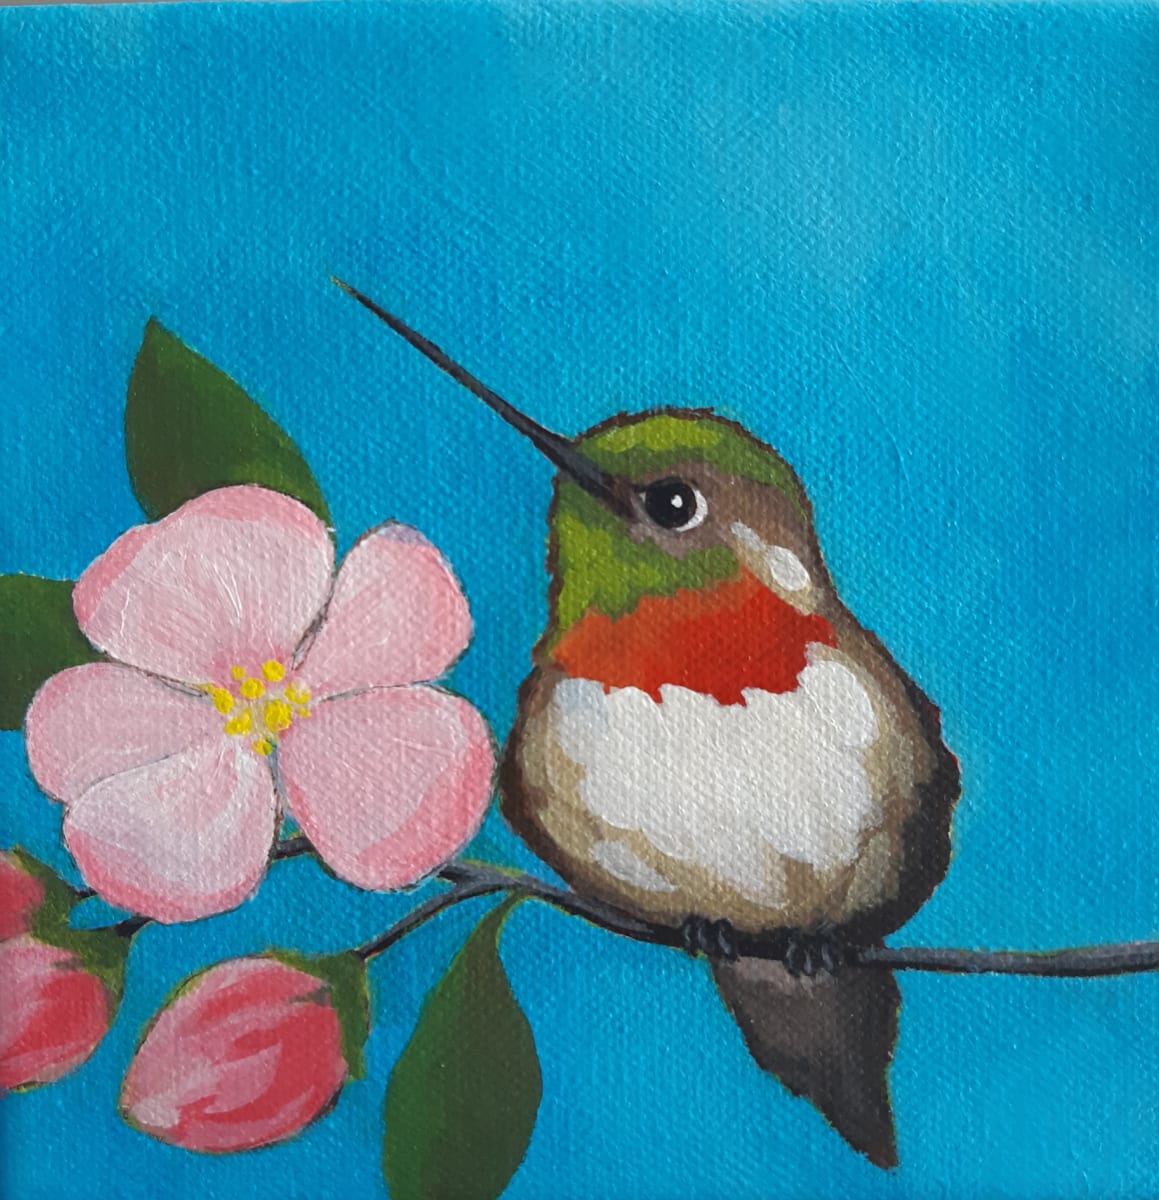 Hummer by Jane Thuss  Image: A cute hummingbird perched beside the apple blossoms.